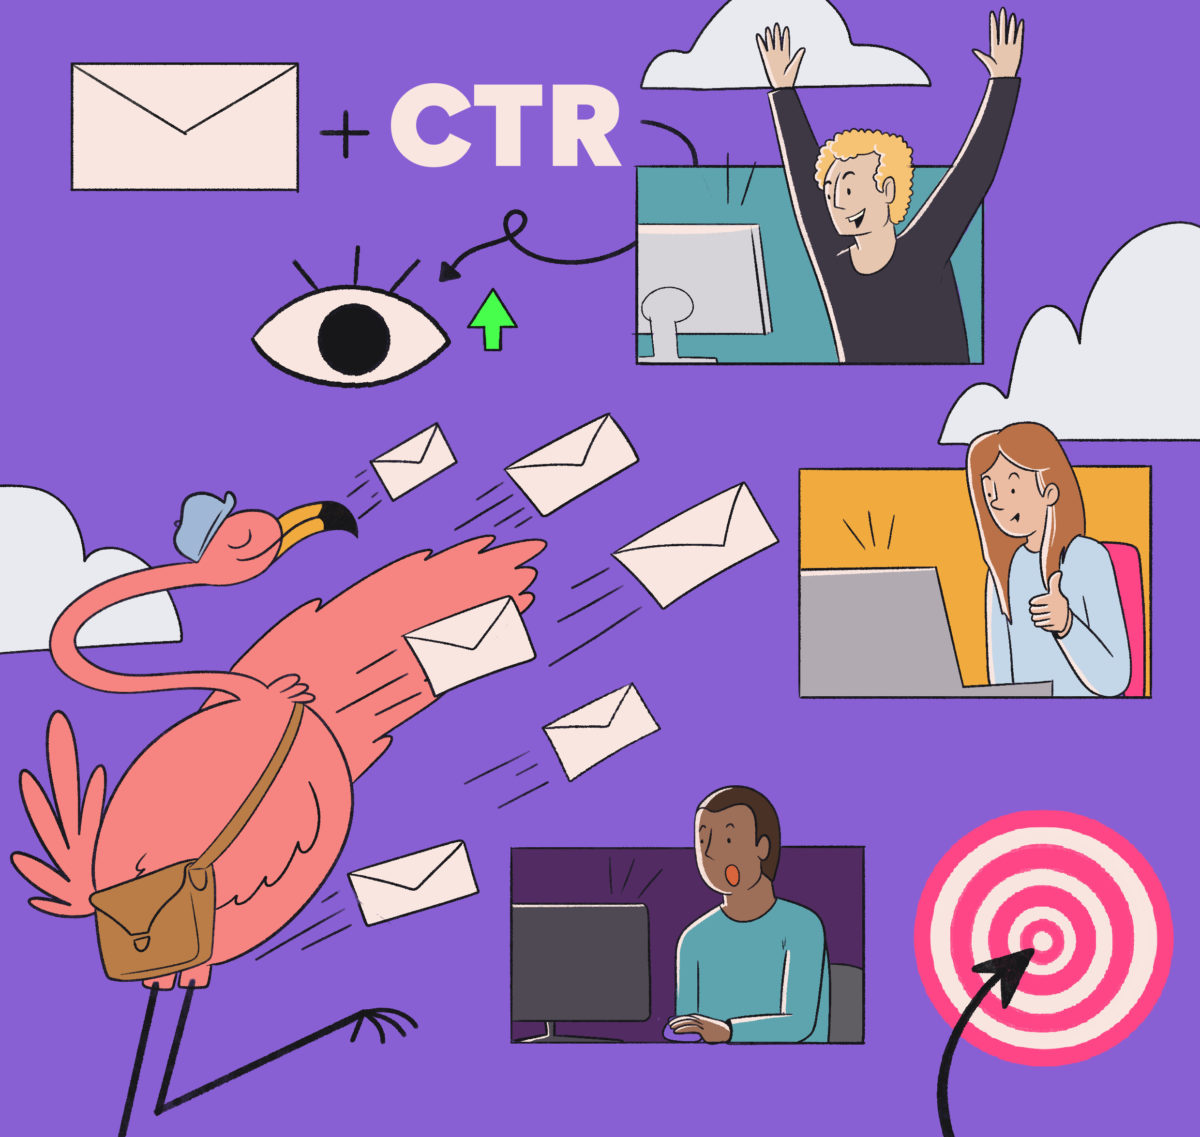 An illustrated collage depicting various elements of digital communication and online interaction, including emails, an enthusiastic person at a computer, another person on a phone call, and symbols like an eye and a click-through rate (ctr) arrow.